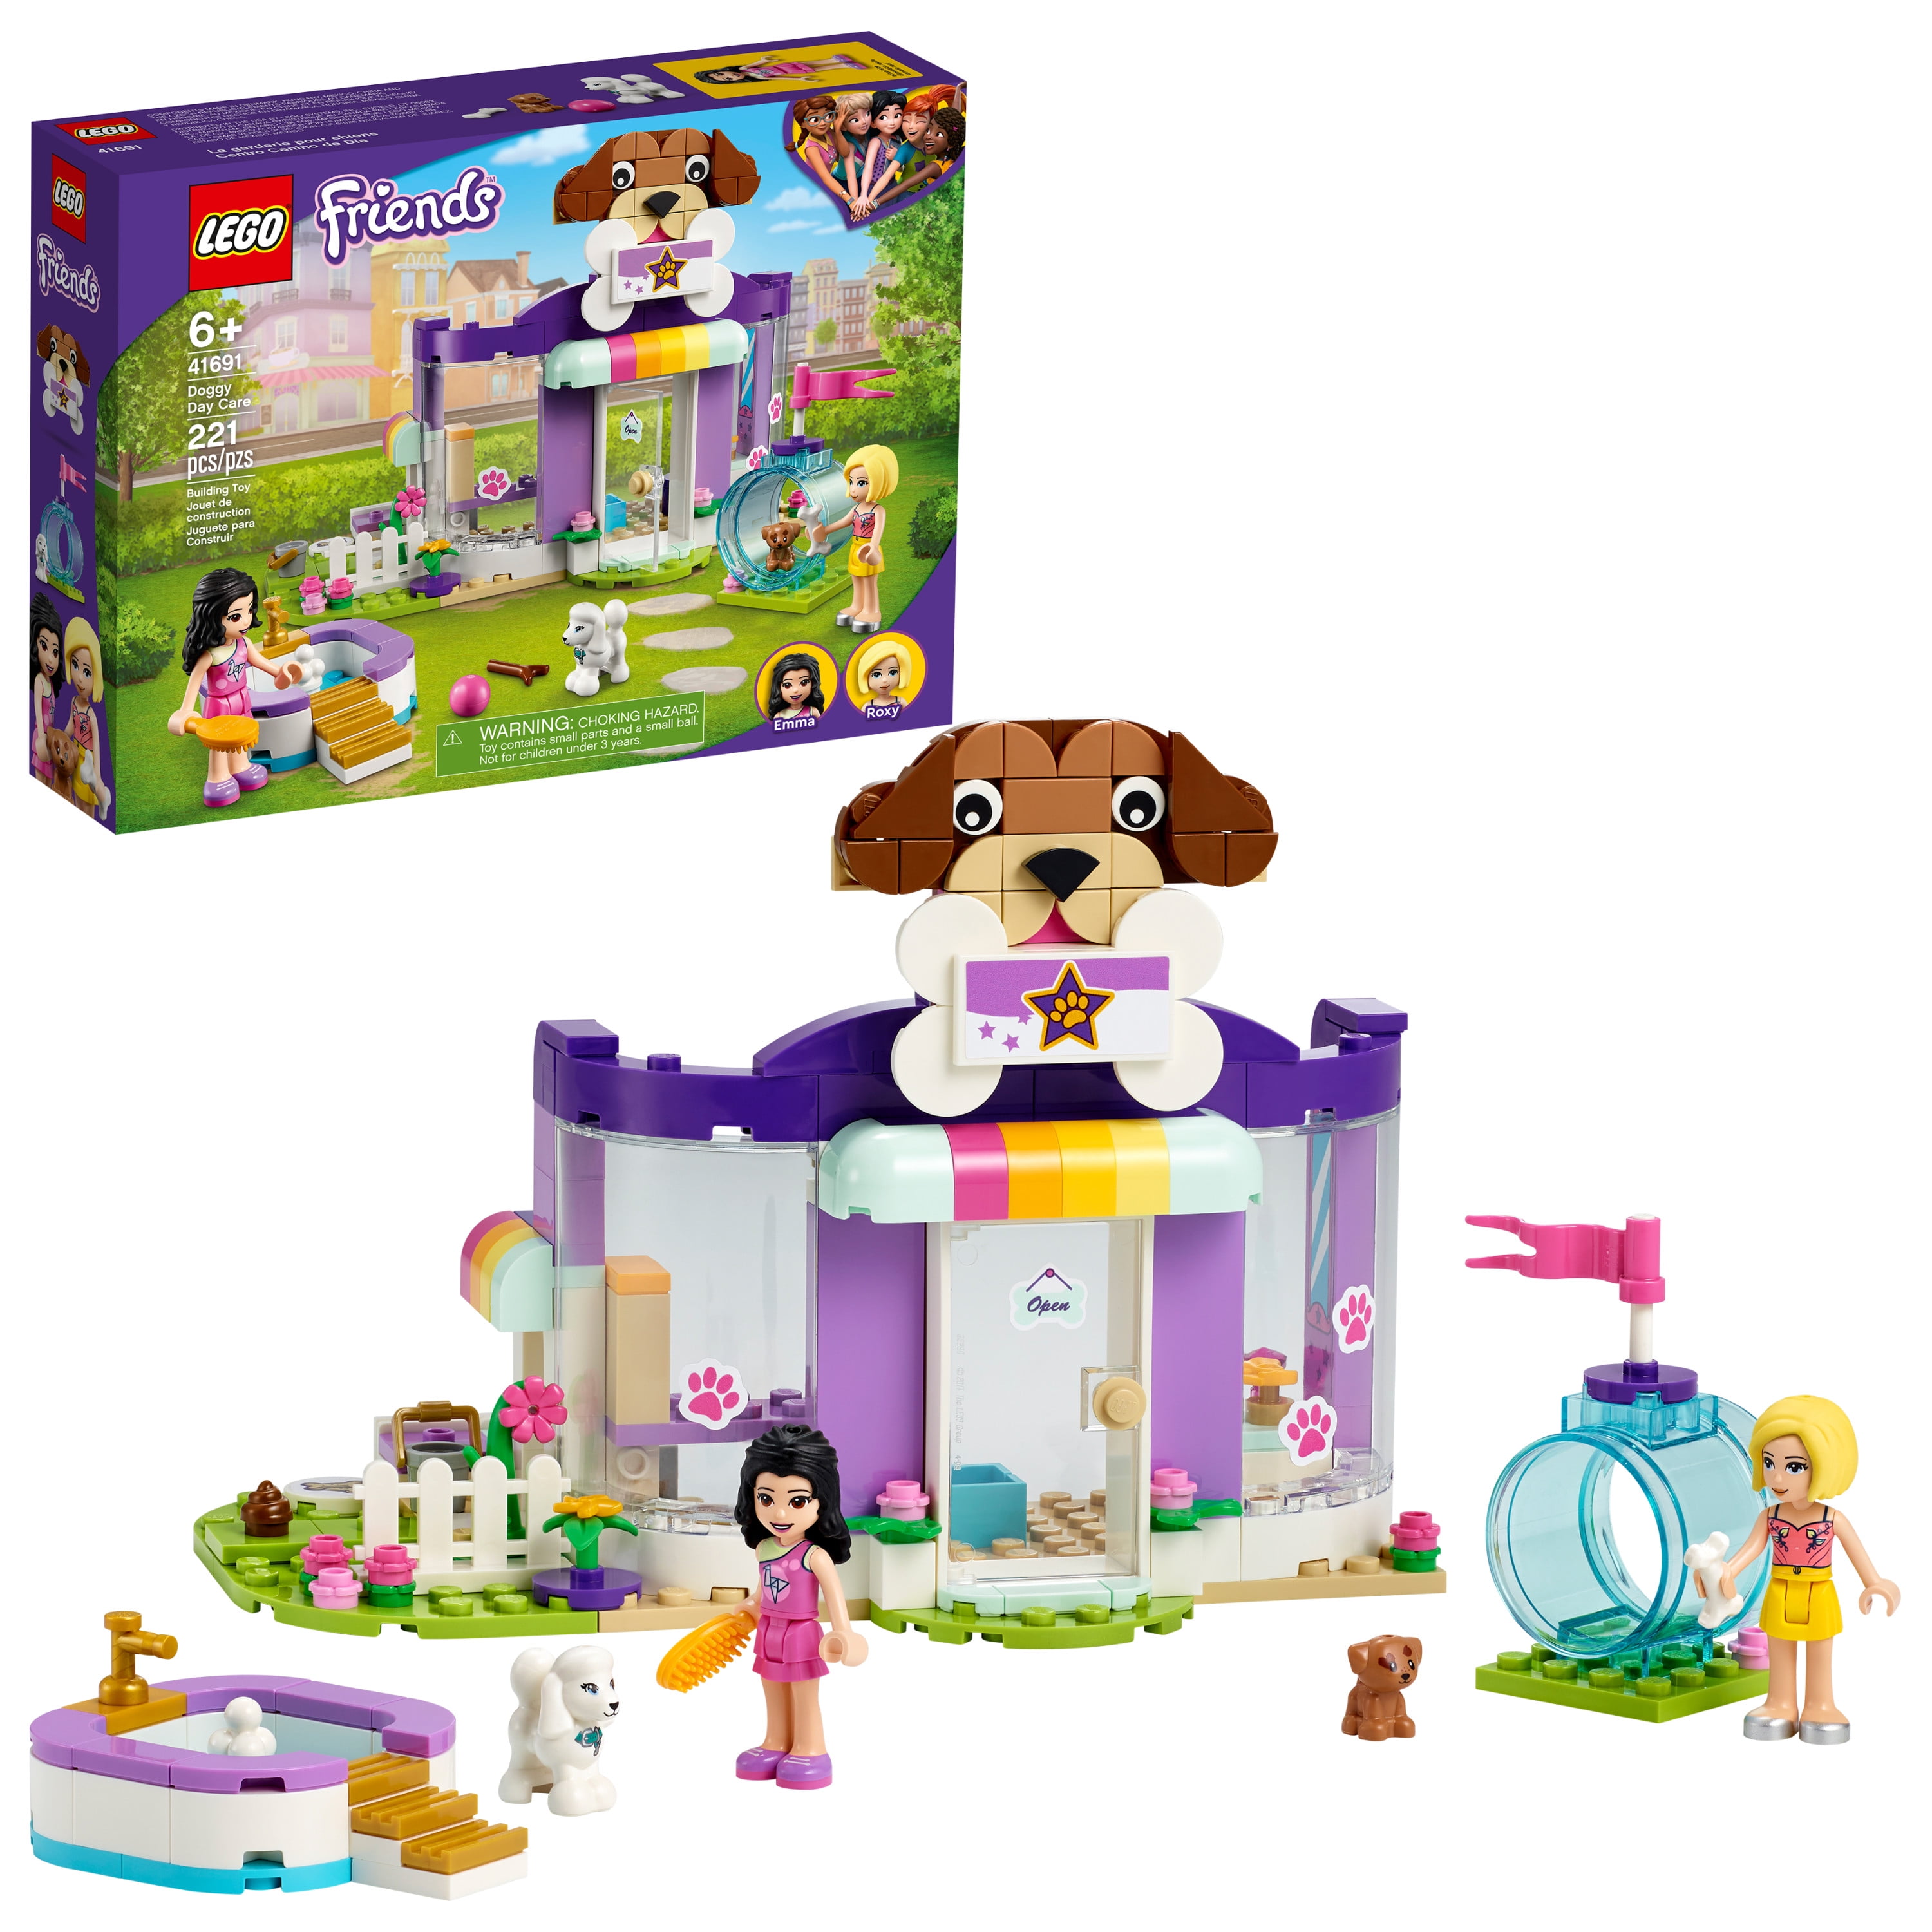 LEGO 41391 Friends Heartlake City Hair Salon Playset with Emma Mini Doll, Wigs and Hair Accessories, for 6+ Year Old 